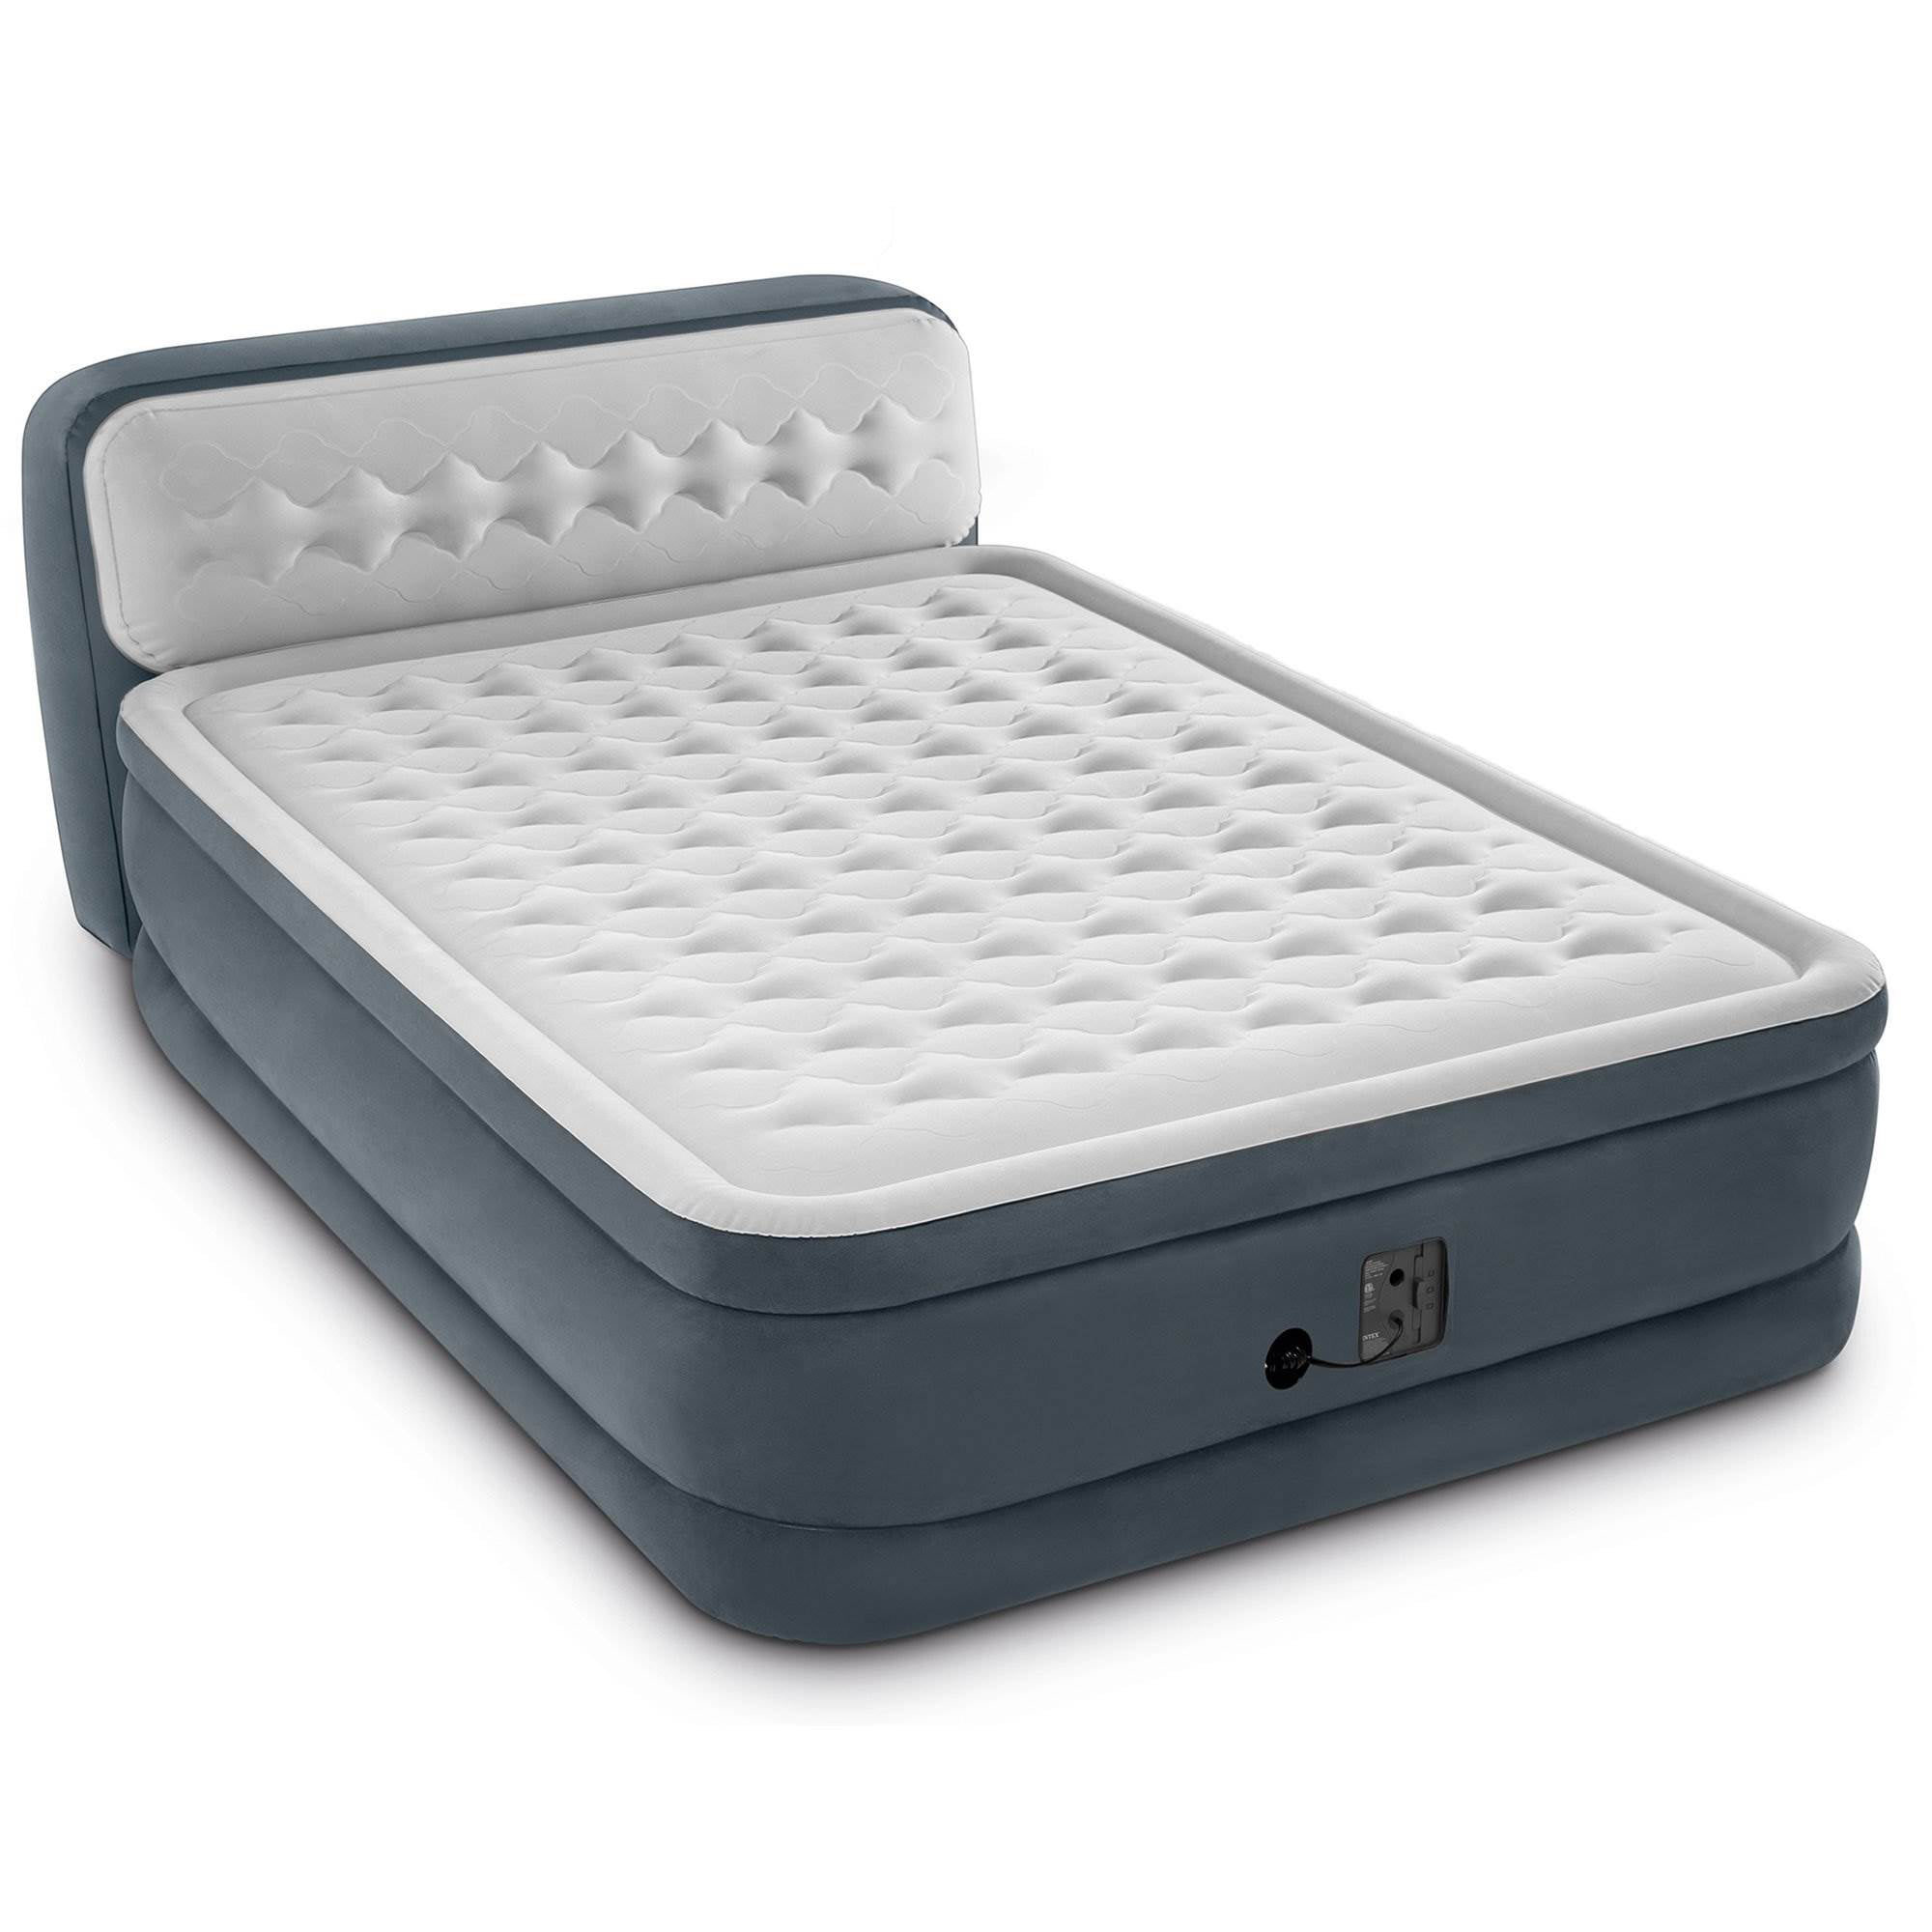 Intex Ultra Plush Inflatable Bed Air Mattress w/ Build-in ...